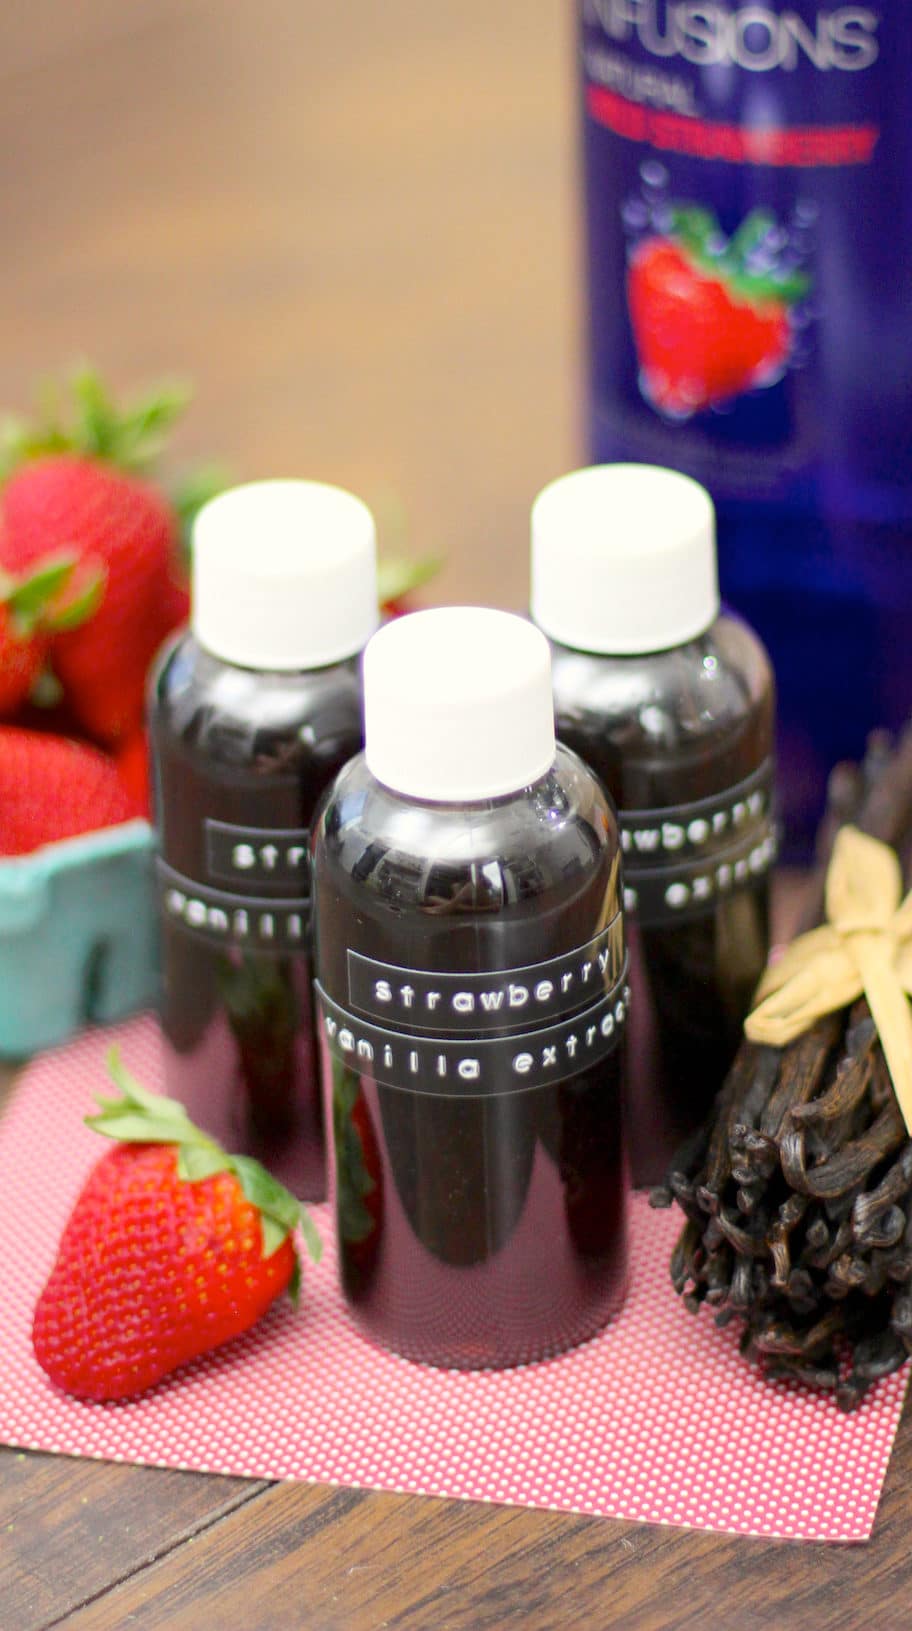 Do you ever wish Vanilla Extract had a little more oomph? Well, now it does! This super easy, 2-ingredient strawberry-infused homemade Vanilla Extract is perfect for cakes, frostings, ice creams and more!